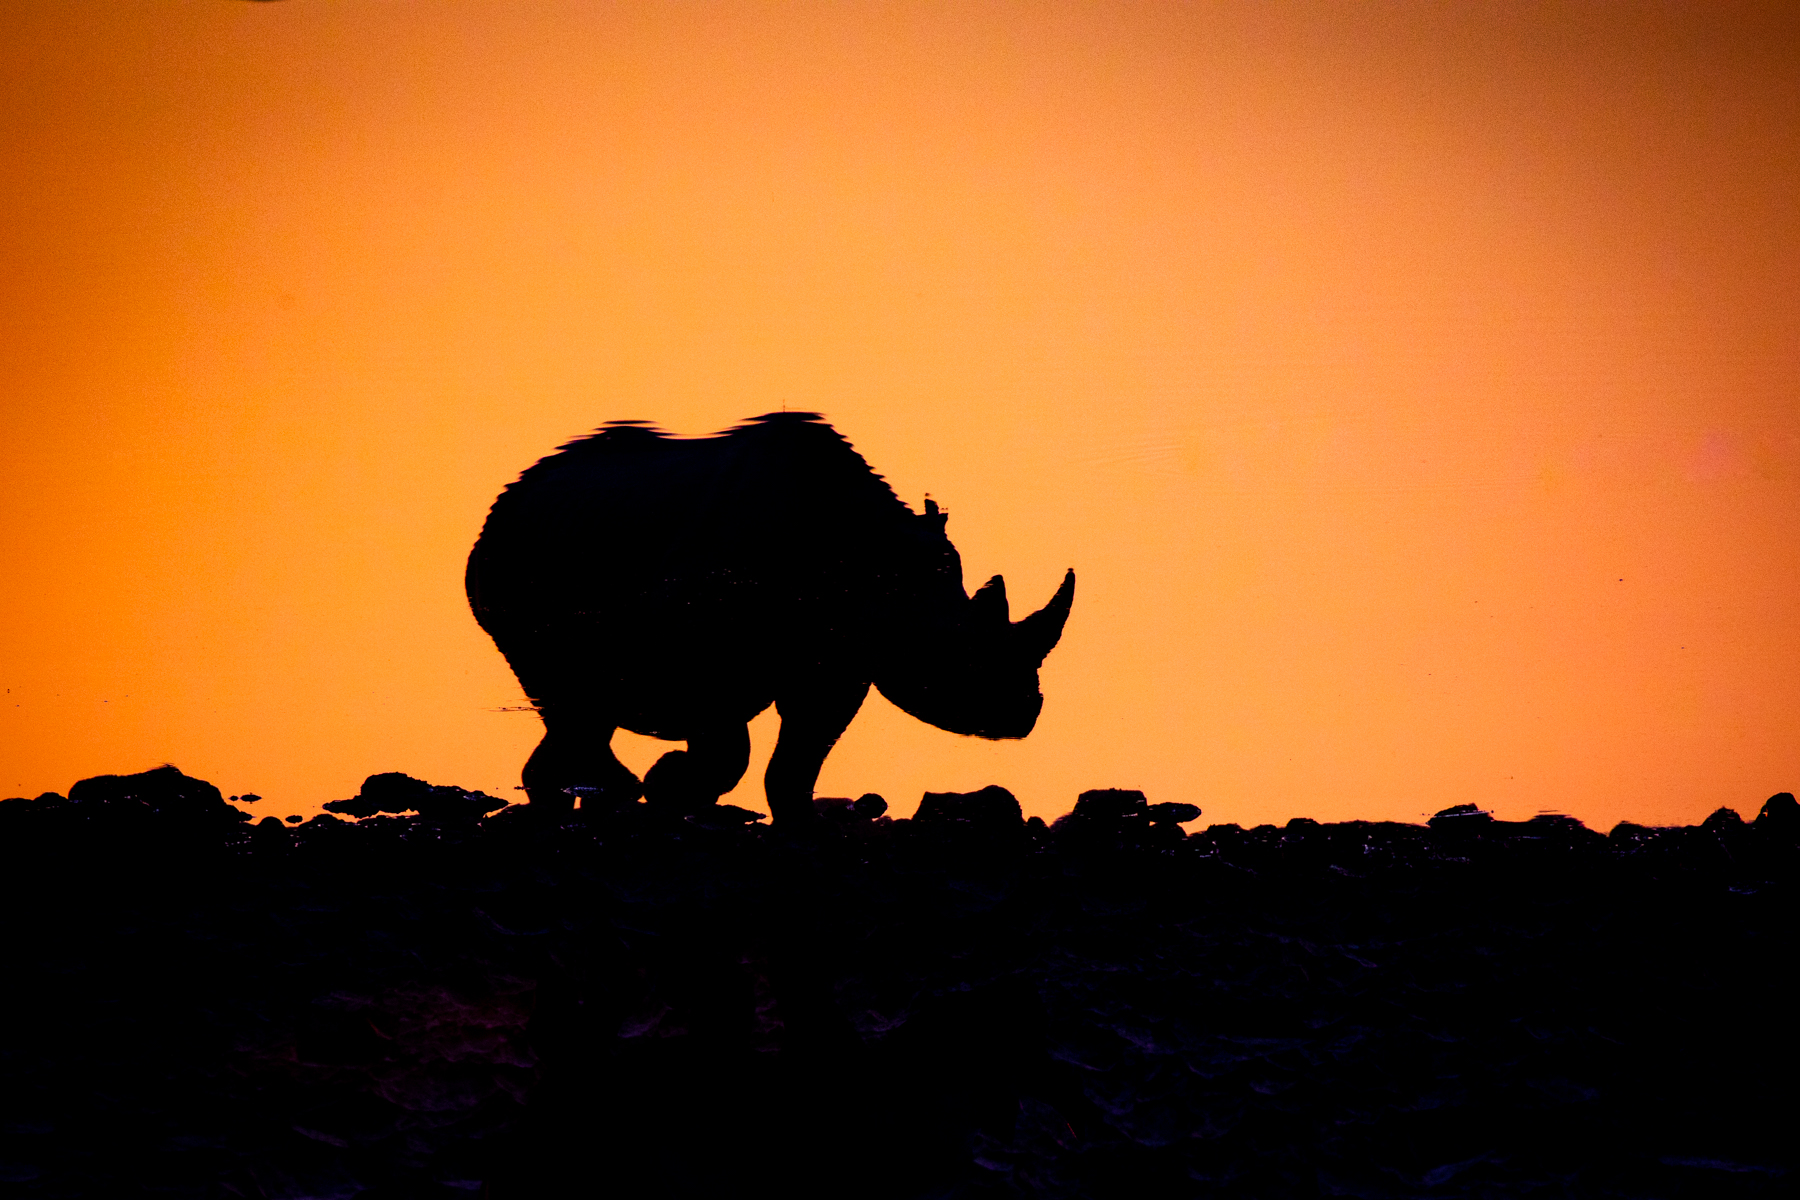 Rhino reflections during our Namibia wildlife photography tour